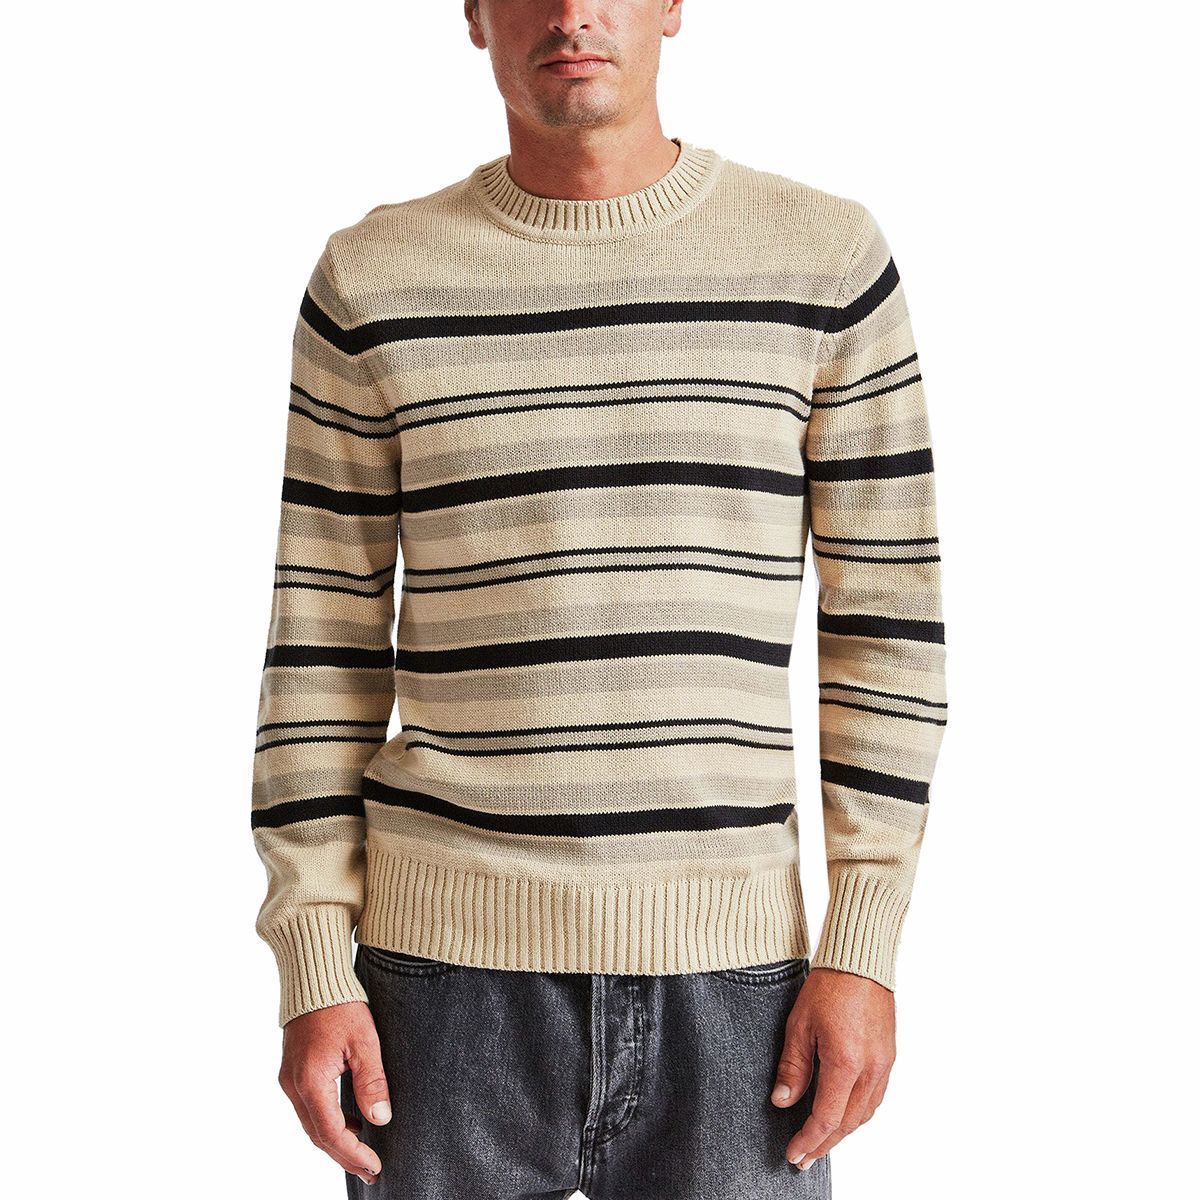 Brixton Wes Sweater - Men's | Backcountry.com